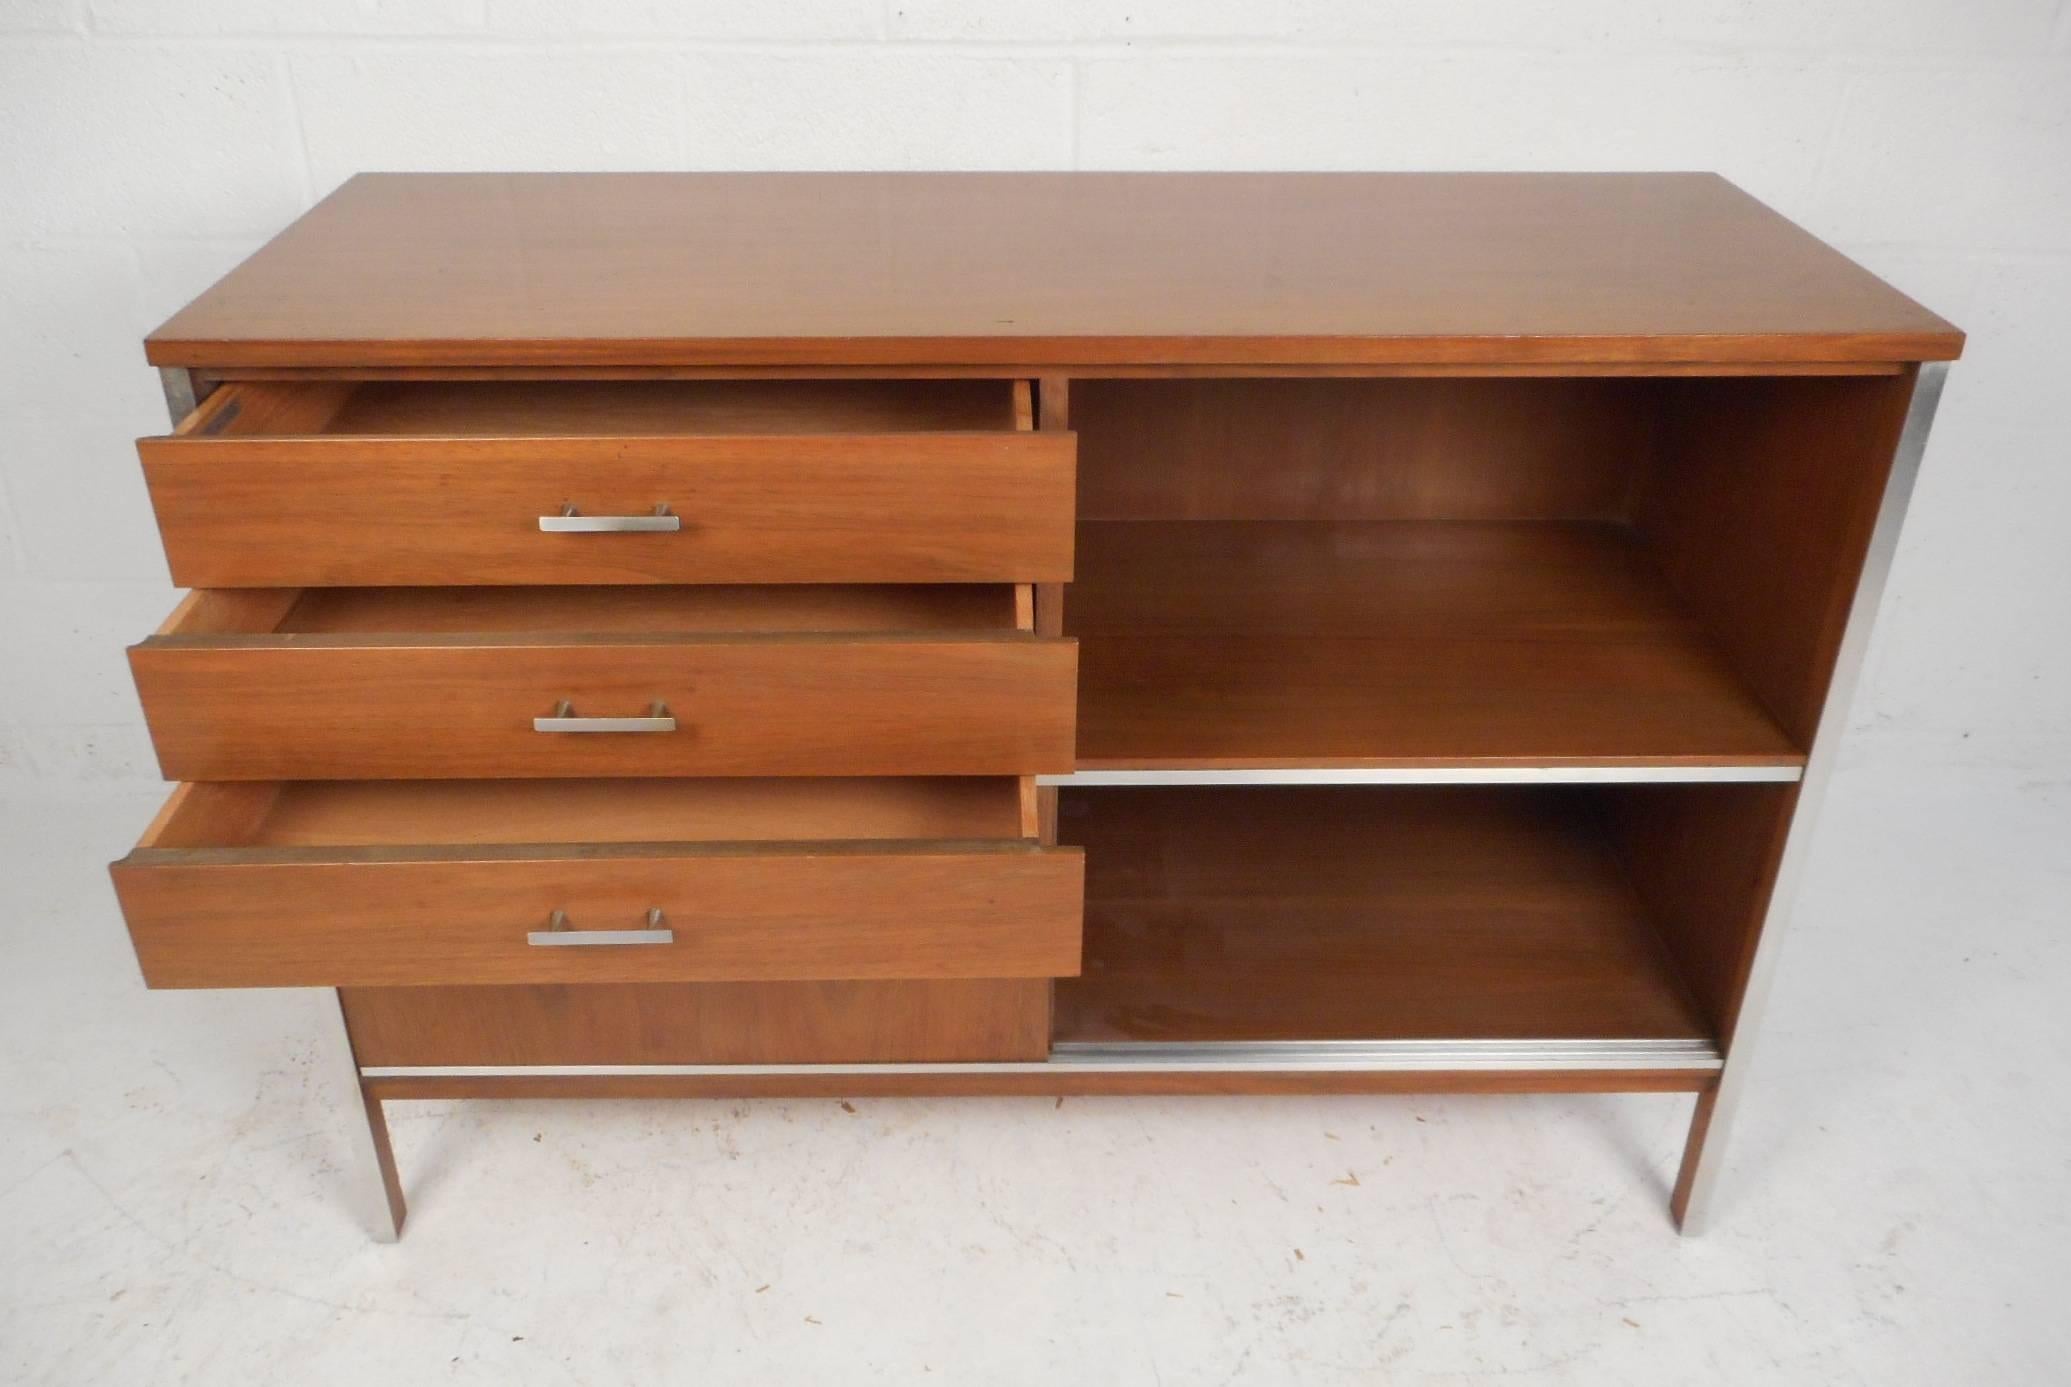 American Mid-Century Modern Compact Credenza by Paul McCobb